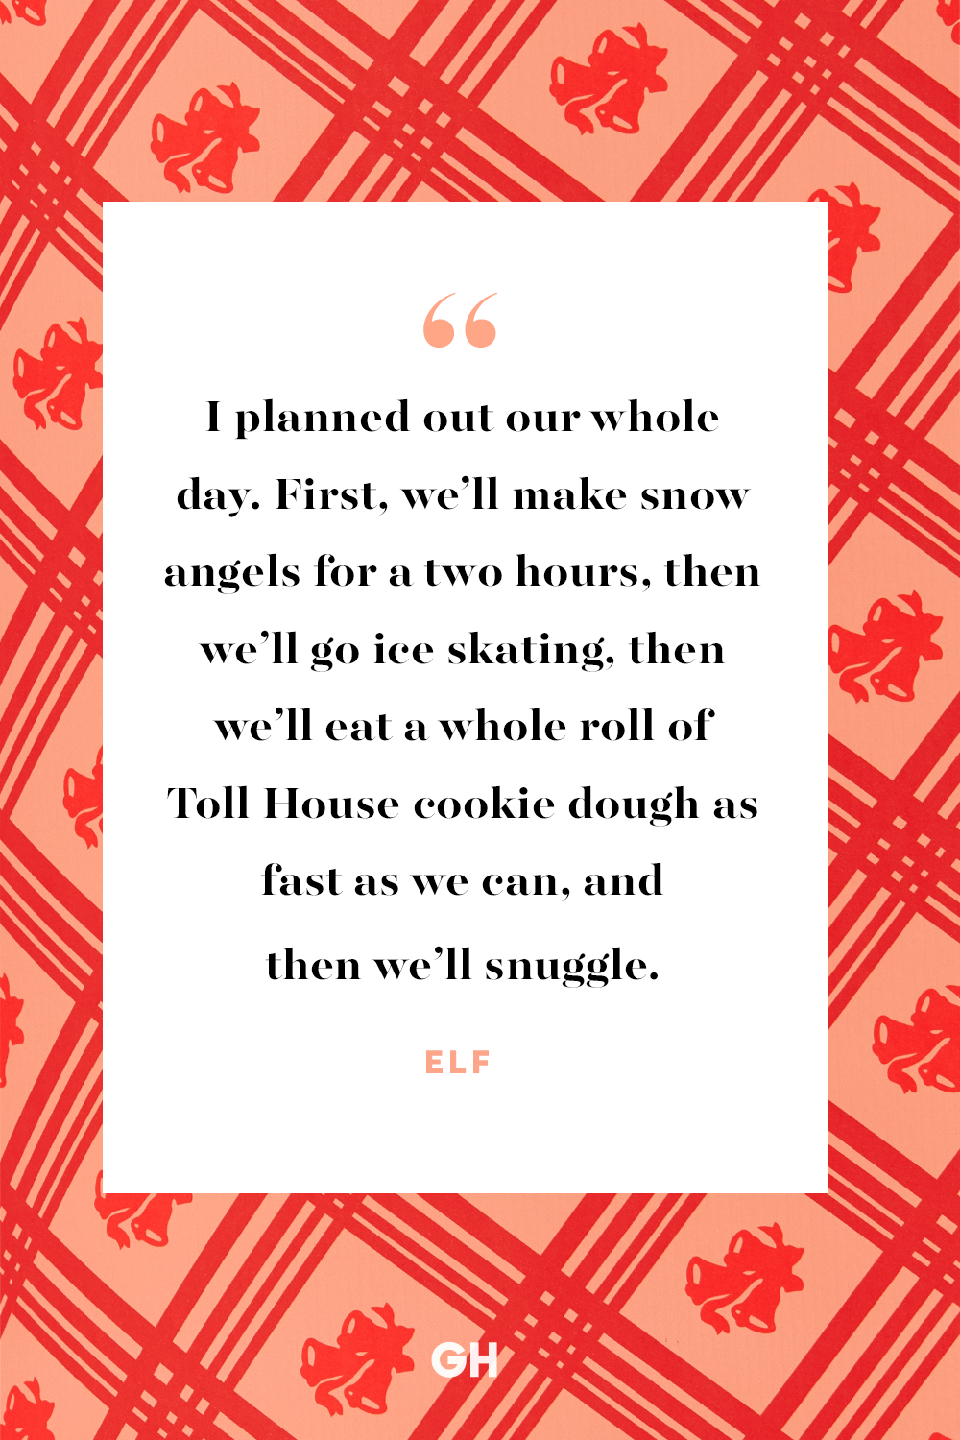 <p>I planned out our whole day. First, we’ll make snow angels for a two hours, then we’ll go ice skating, then we’ll eat a whole roll of Toll House cookie dough as fast as we can, and then we’ll snuggle. </p>